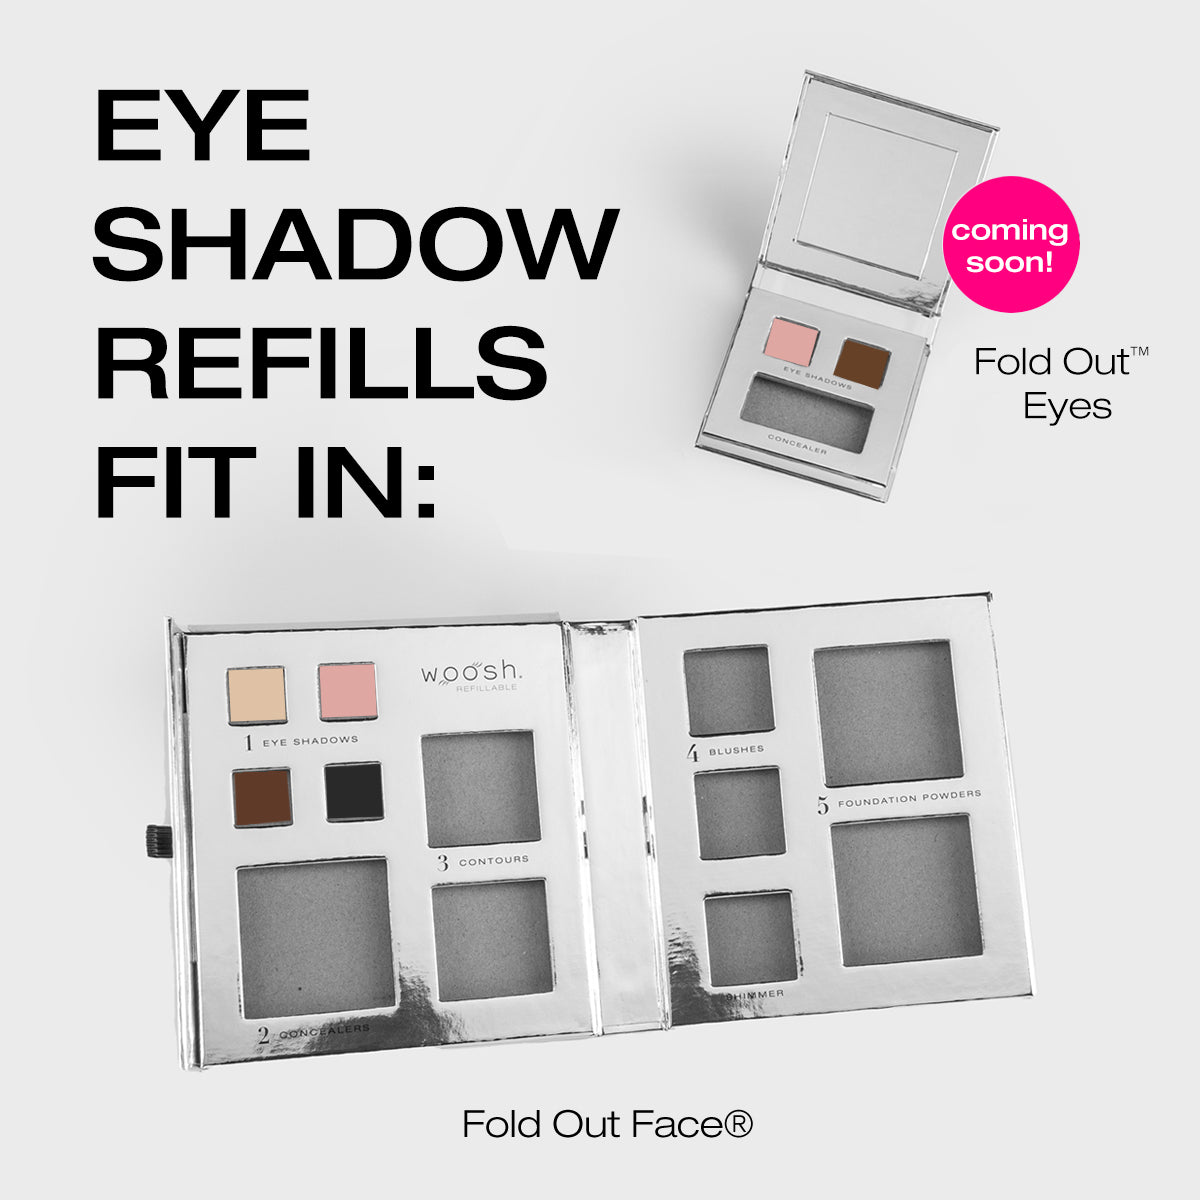 Demo of how eye shadow refills fit in the fold out eyes and fold out face